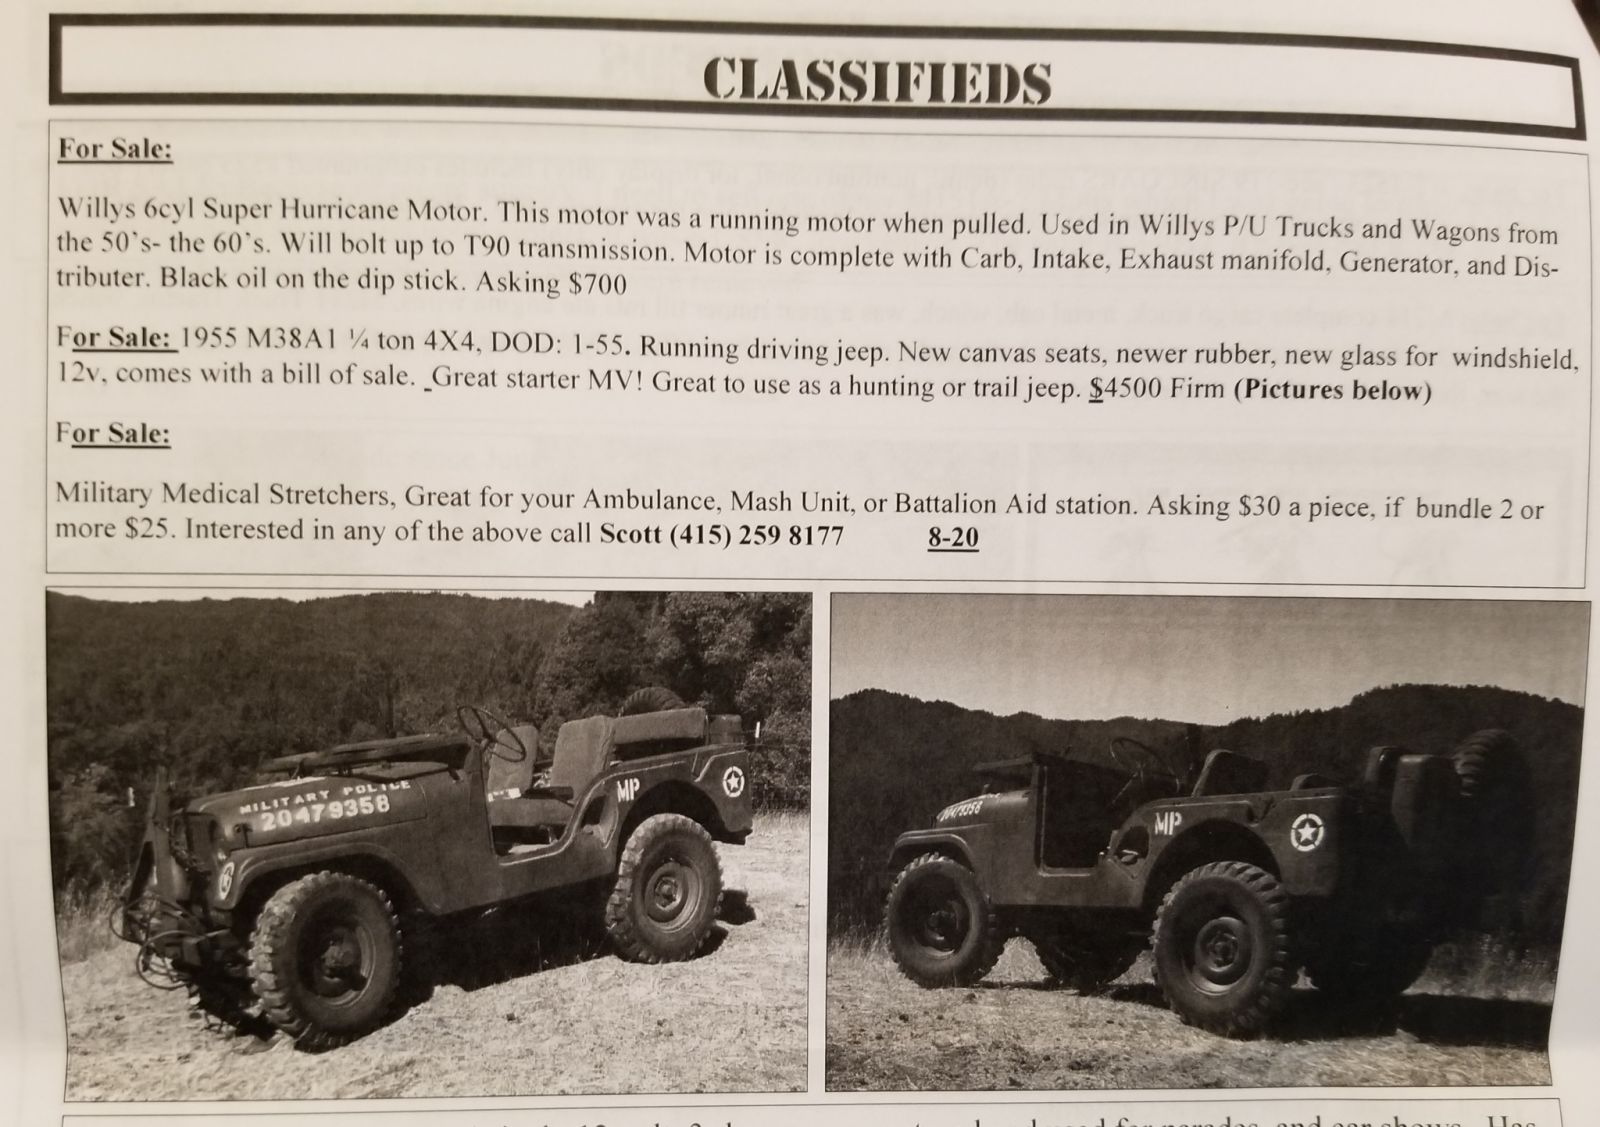 Illustration for article titled My MVPA/MVCC newsletter has some MASH stuff and nice Jeep for sale pretty cheap.